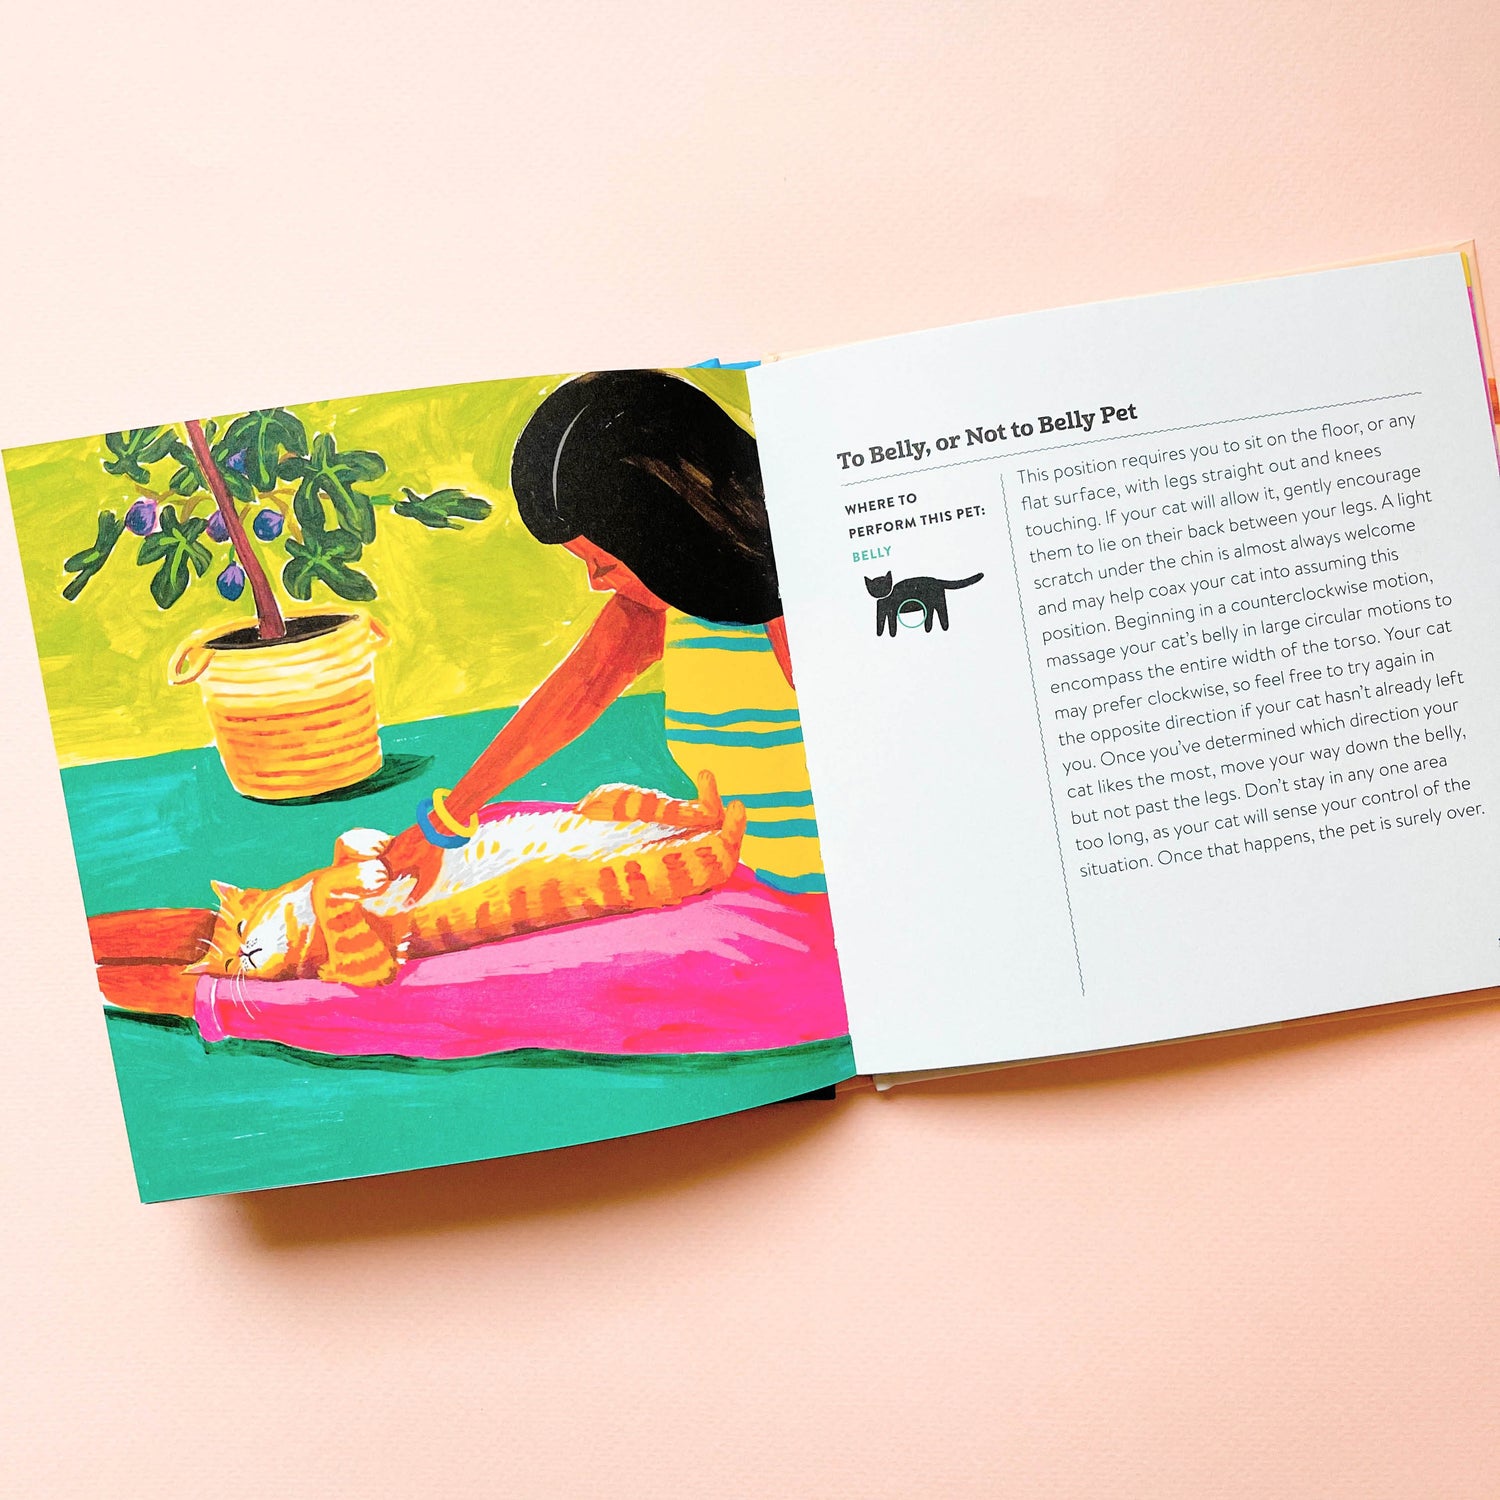 How To Pet A Cat book with woman petting the belly of a cat